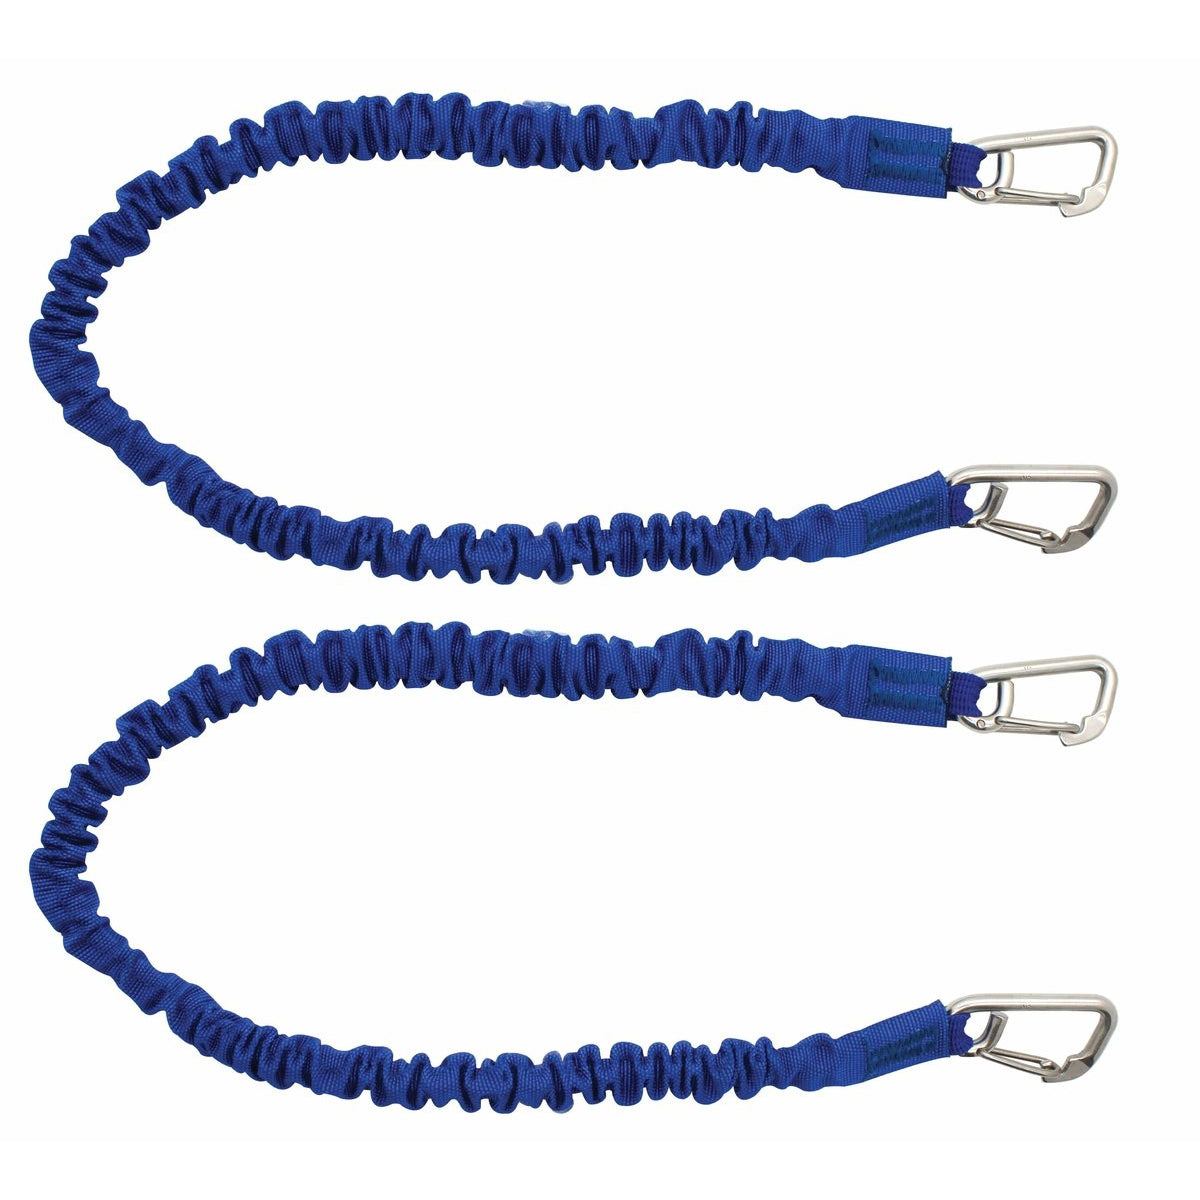 Extreme Max High-Strength Line Snubber 2-pk 48" Blue #3006.2792